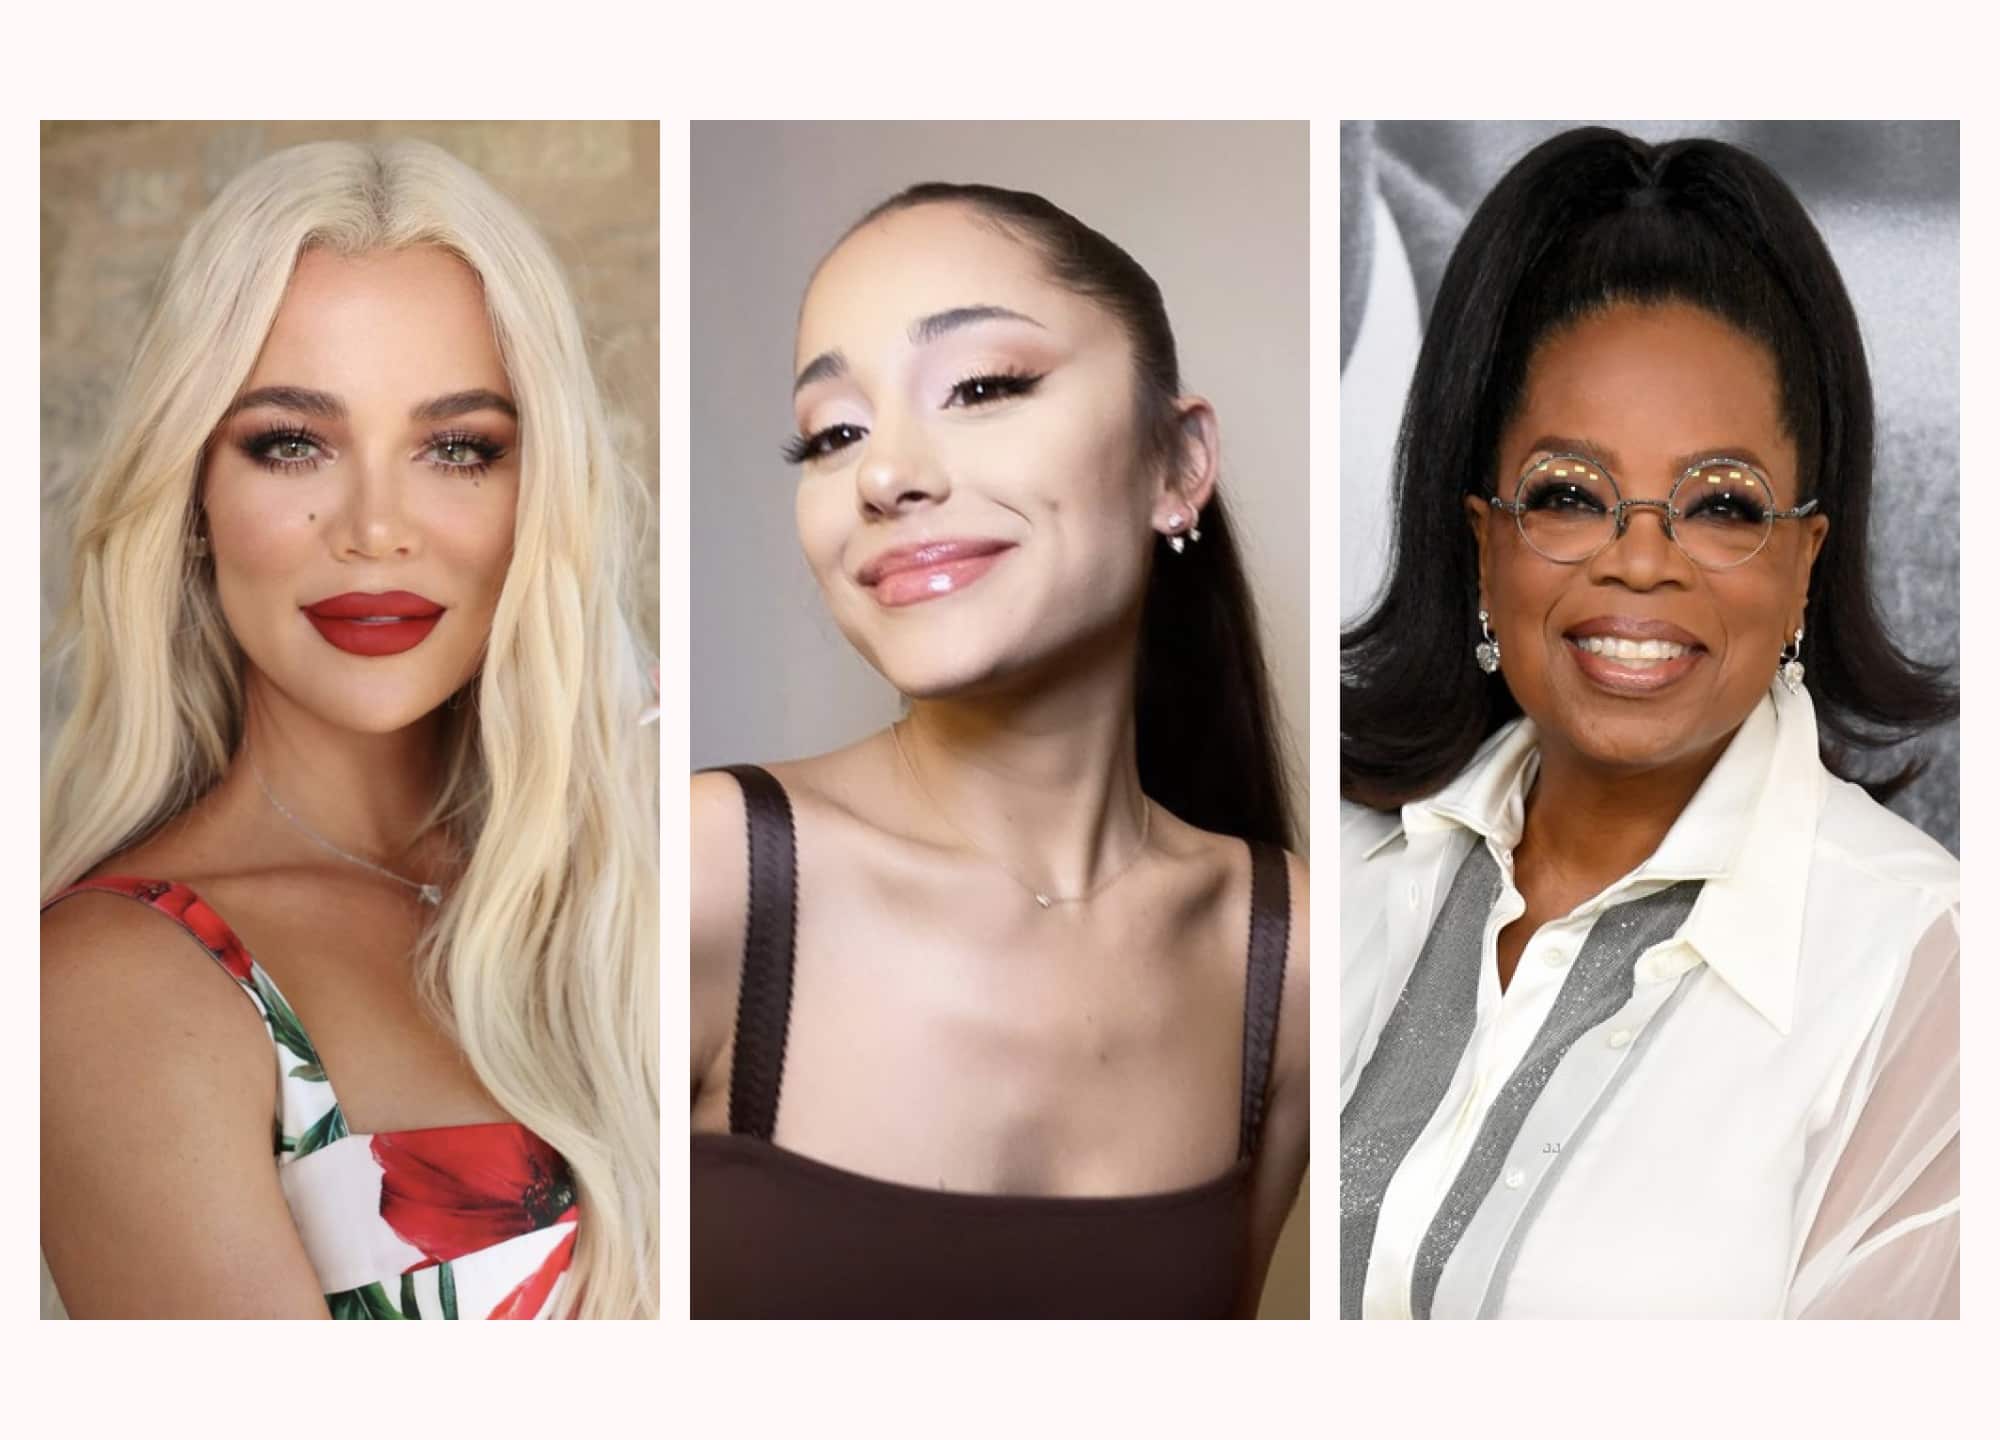 7 Top Plastic Surgery Trends for 2019, According to Plastic Surgeons